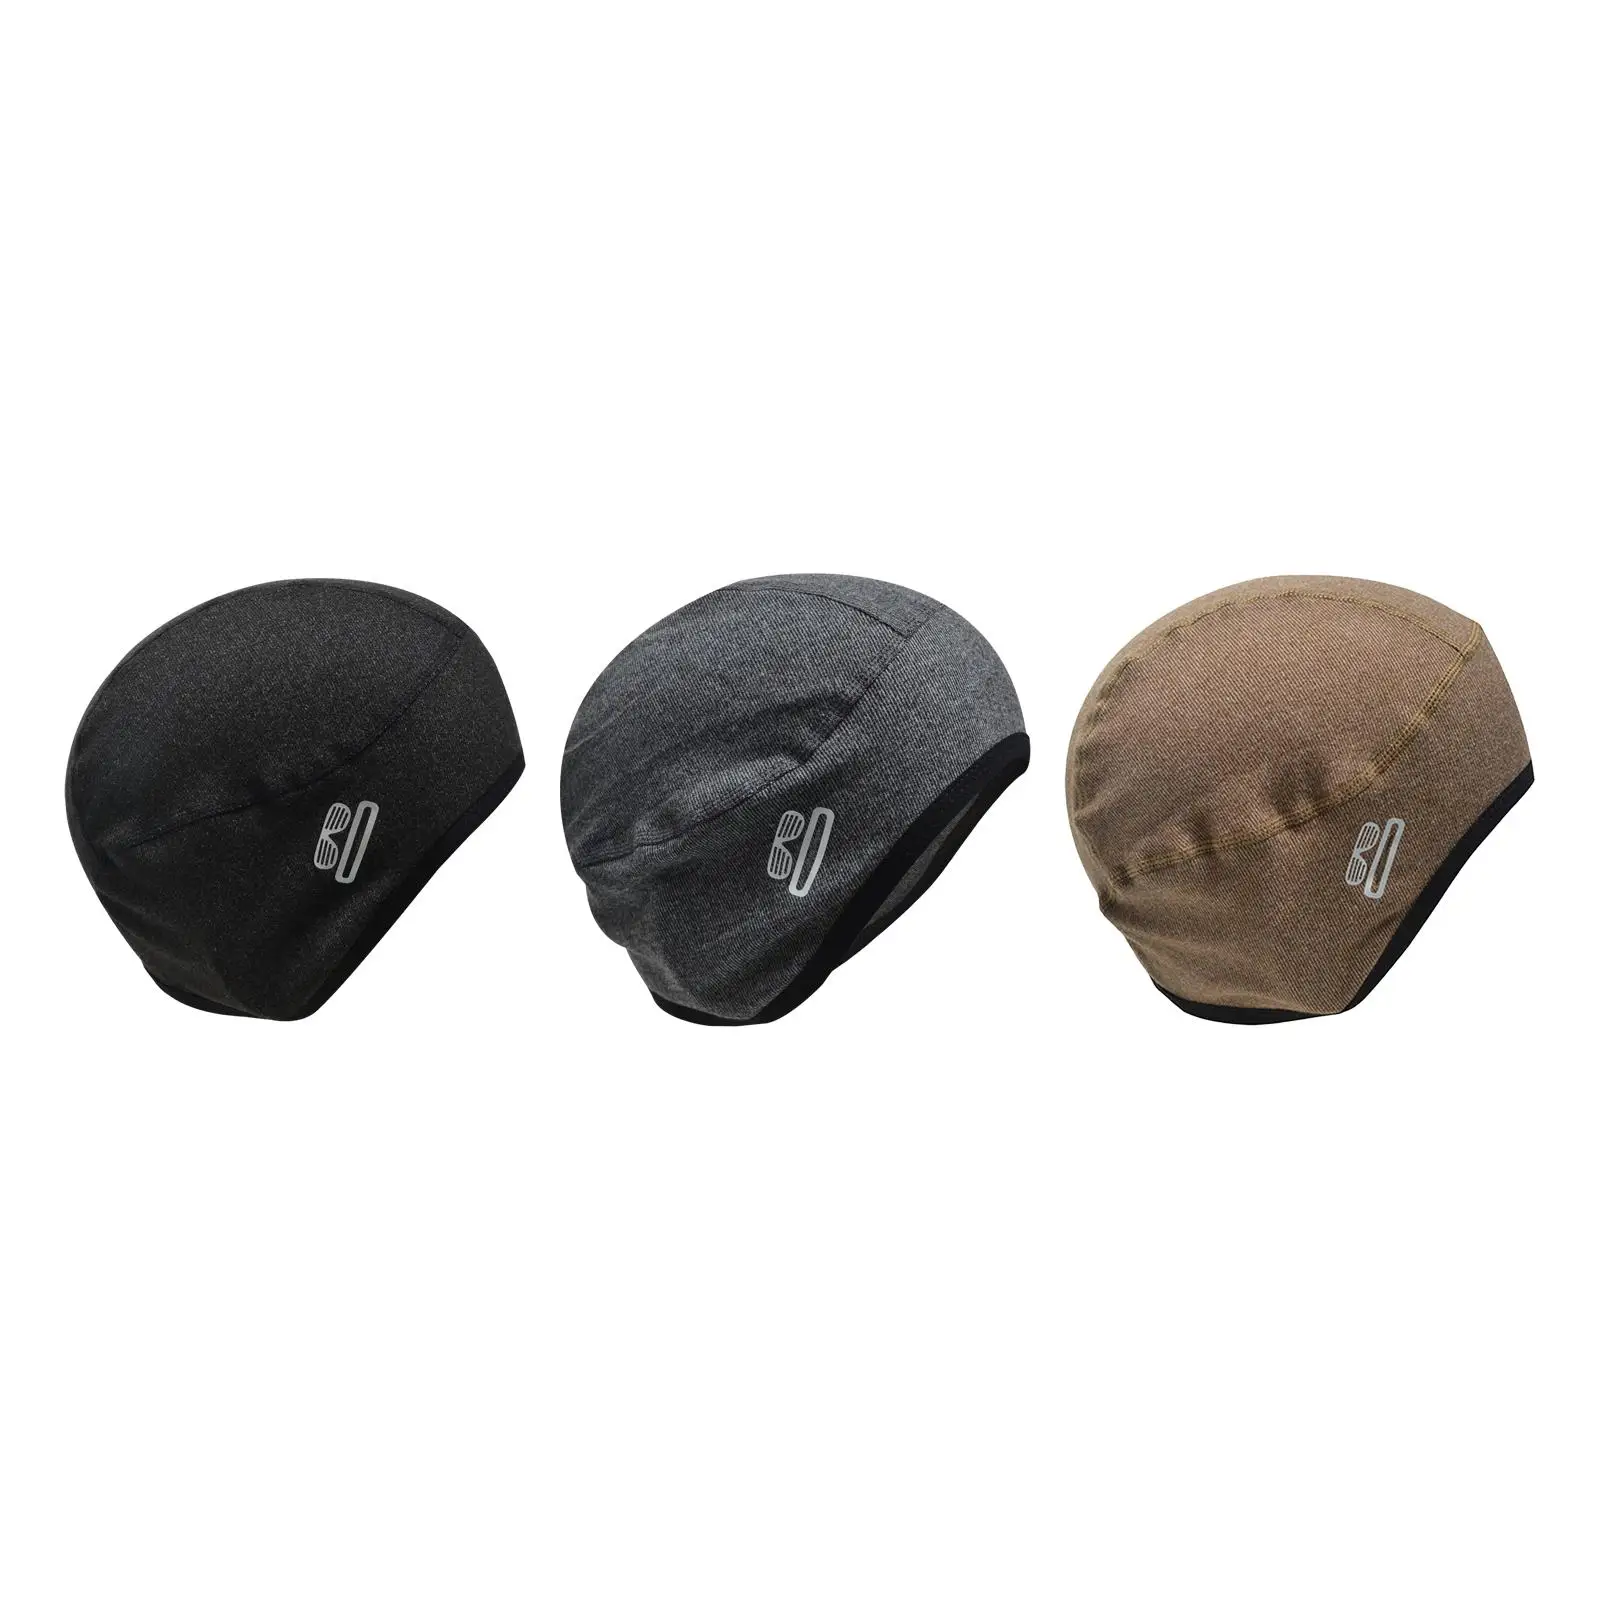 Skull Cap Helmet Liner Earflaps Stretch for Men Beanie Windproof Hat for Riding Climbing Cold Weather Outdoor Sports Motorcycle